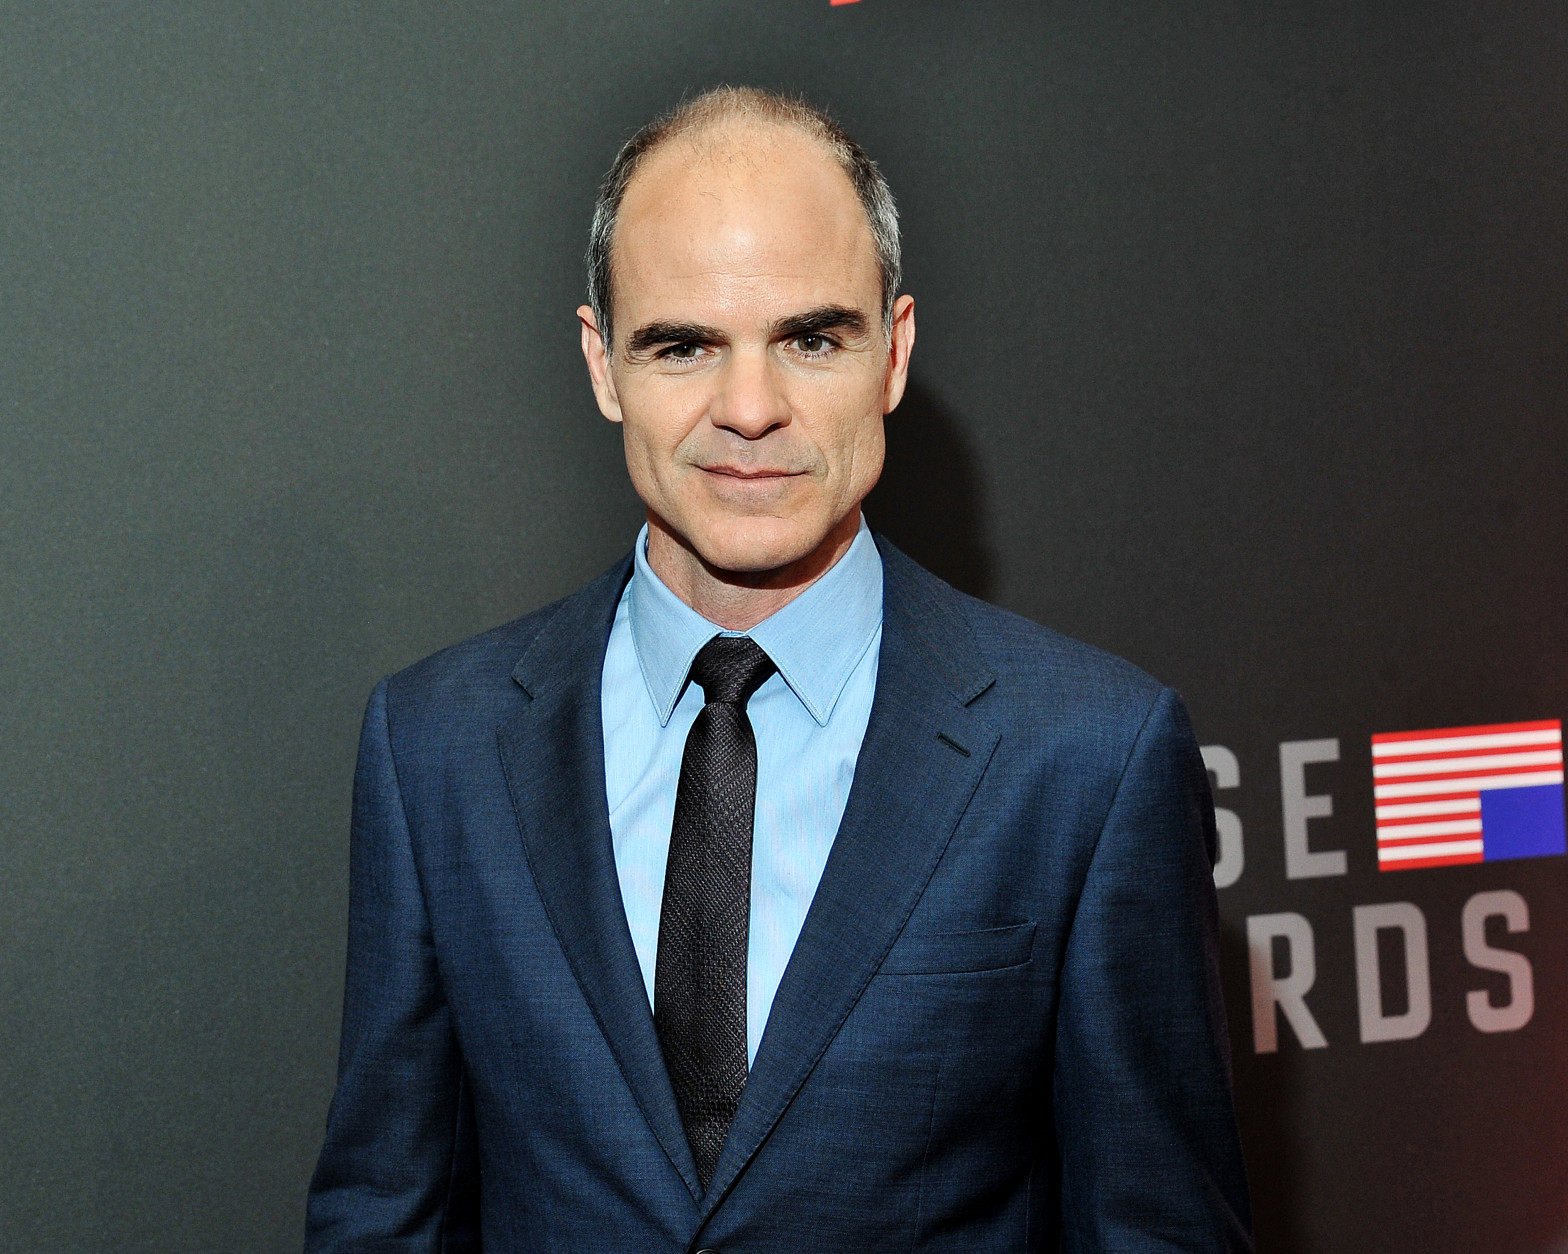 Michael Kelly, of “House of Cards,” also attended the event at the National Portrait Gallery in D.C. on Feb. 22, 2016.  (Courtesy Shannon Finney, www.shannonfinneyphotography.com)